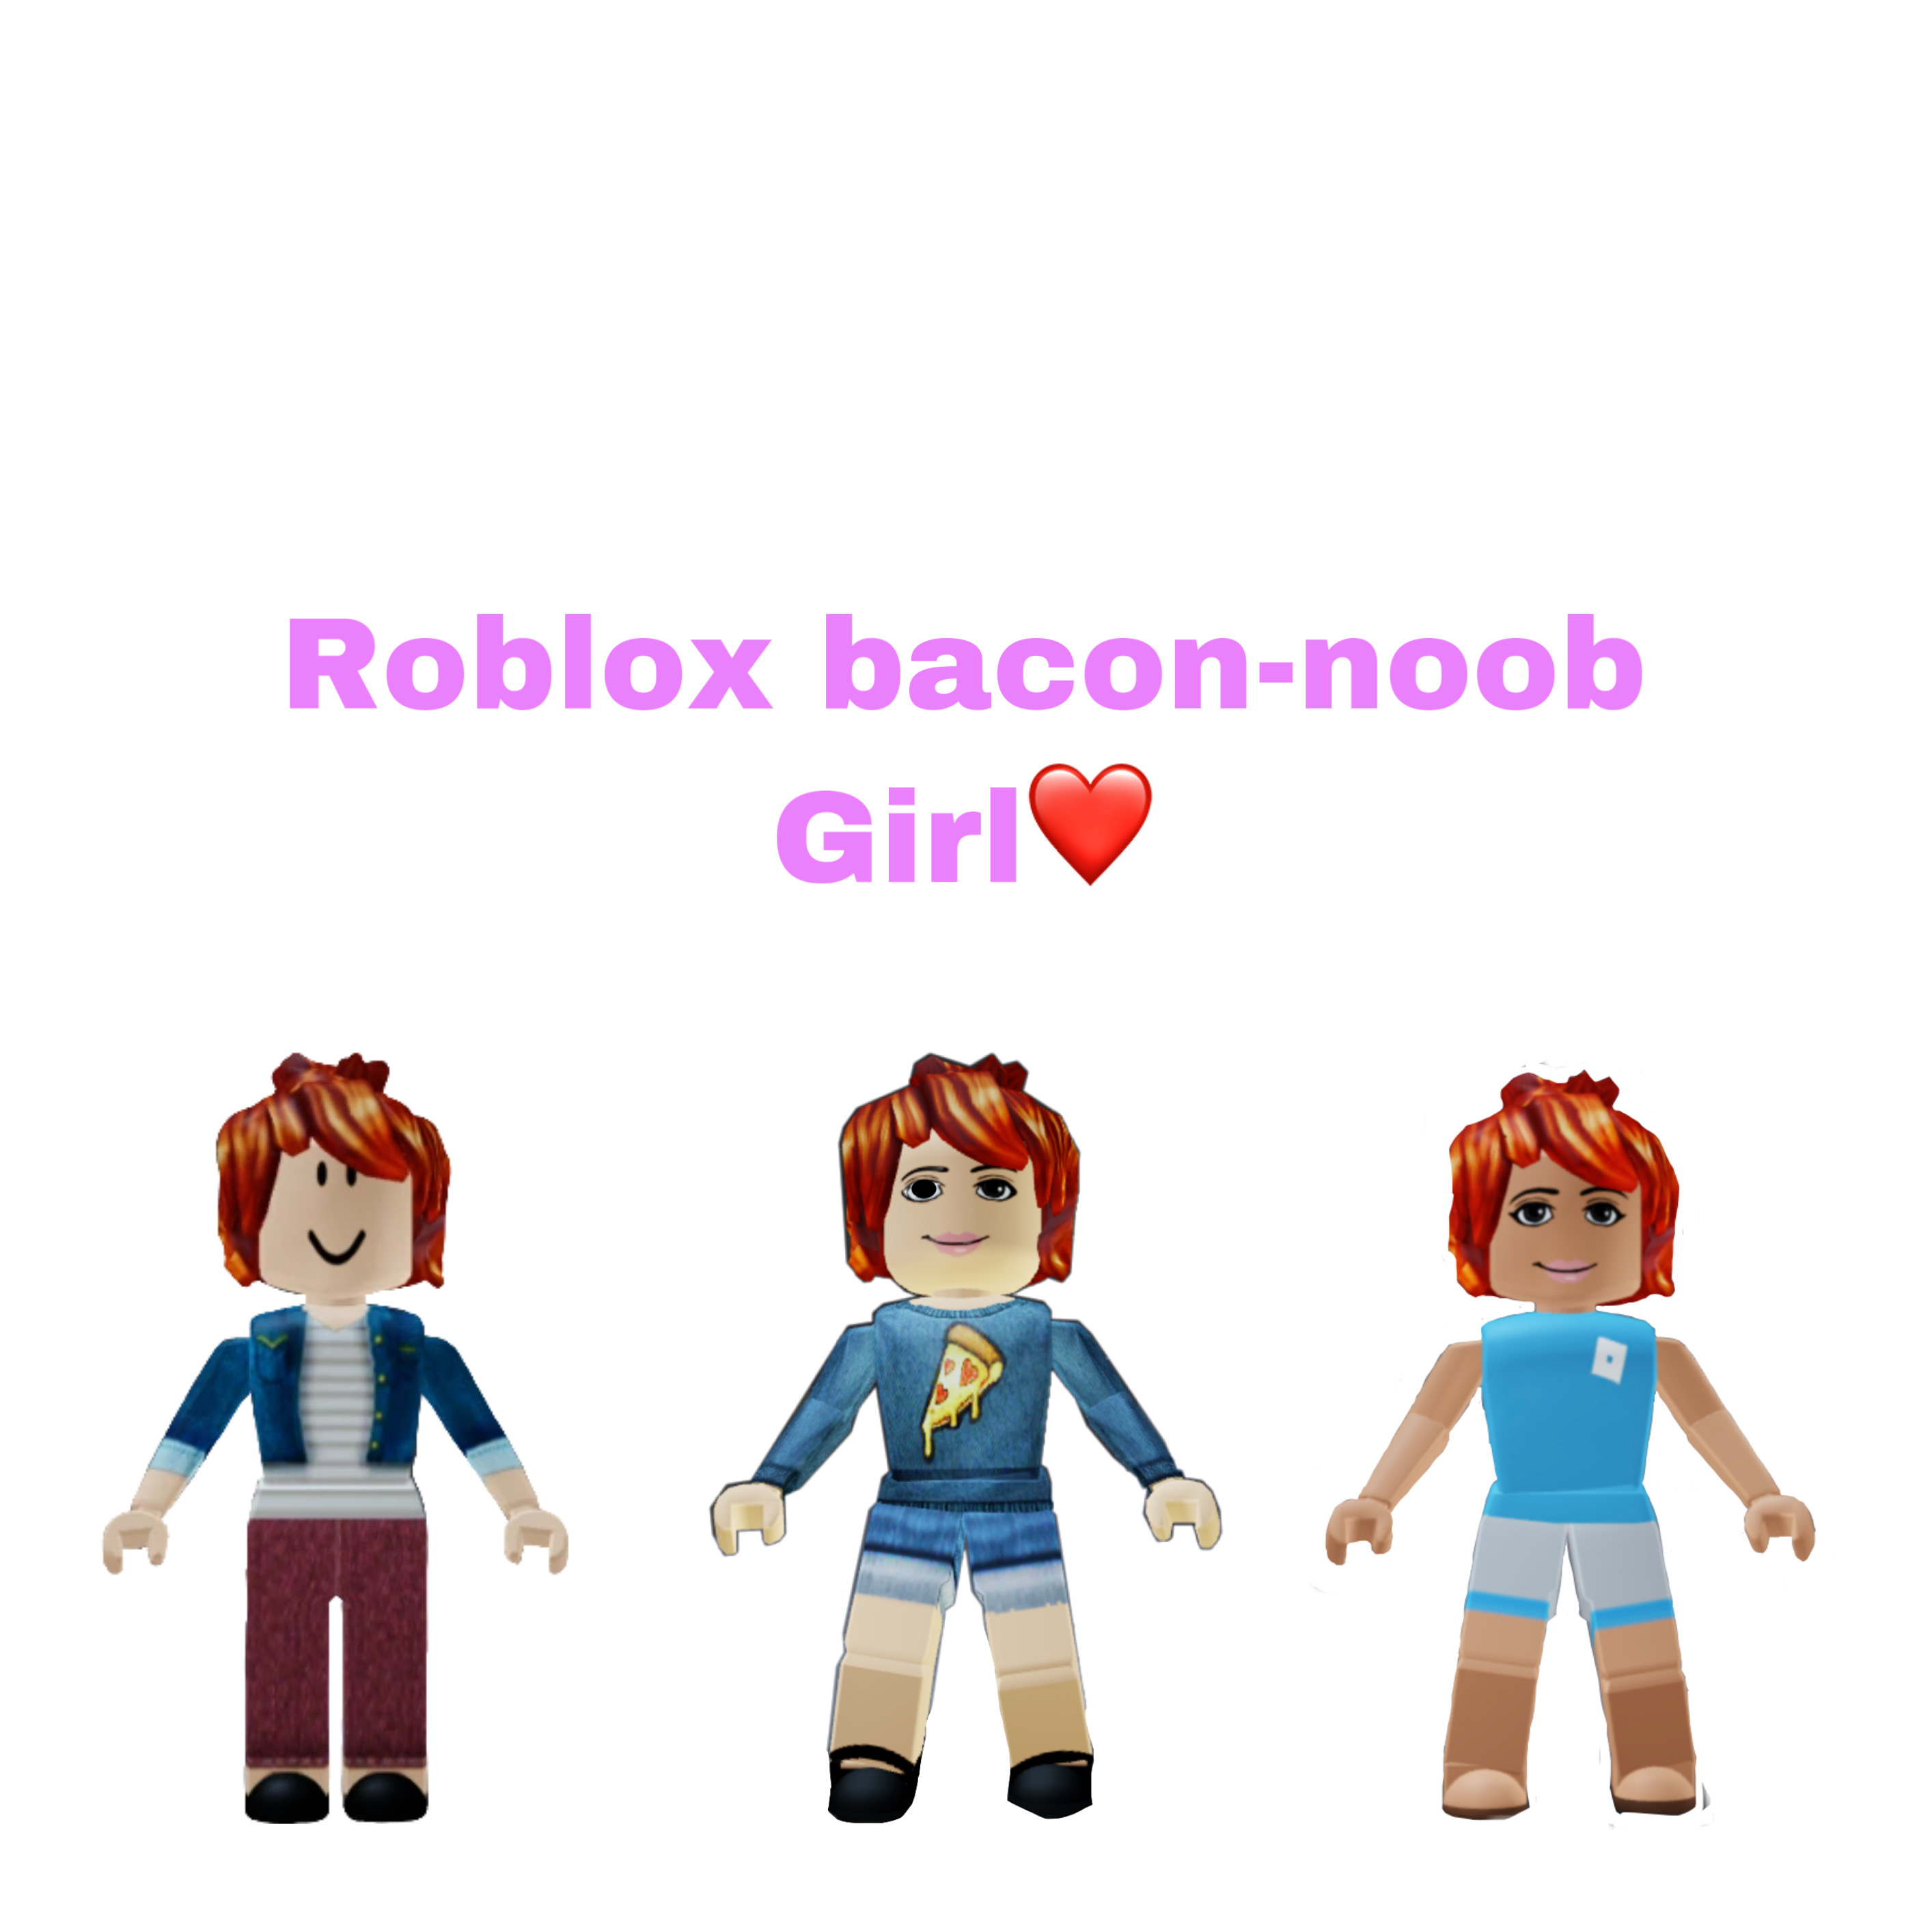 freetoedit roblox bacon girl image by @miaturnschuh